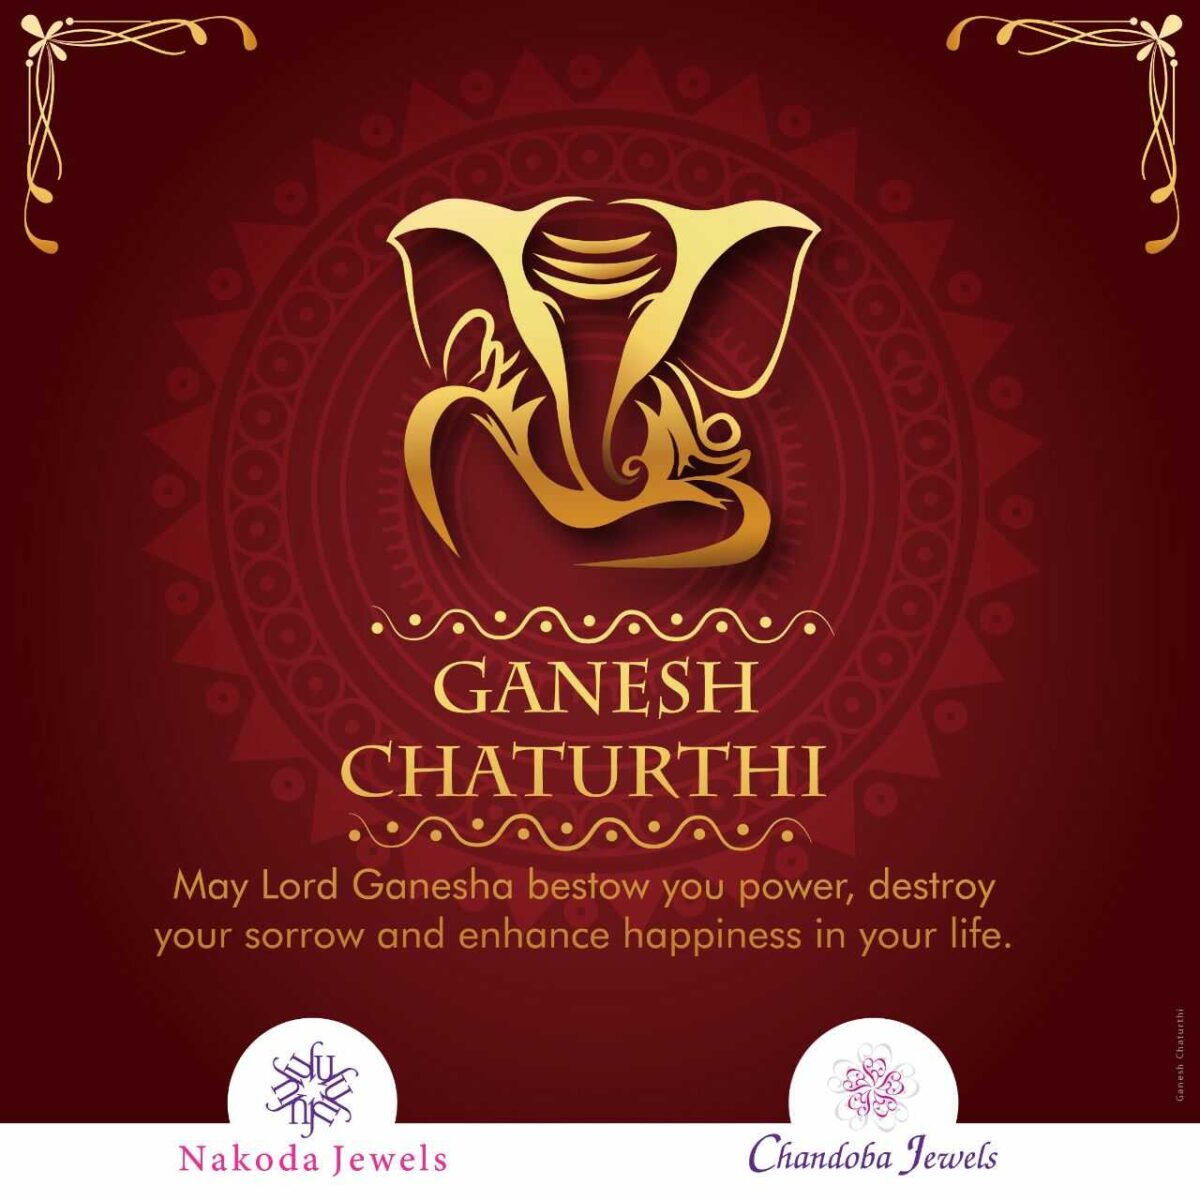 ganesh-chaturthi,-festival-graphic-design-for-jwellery-show-room